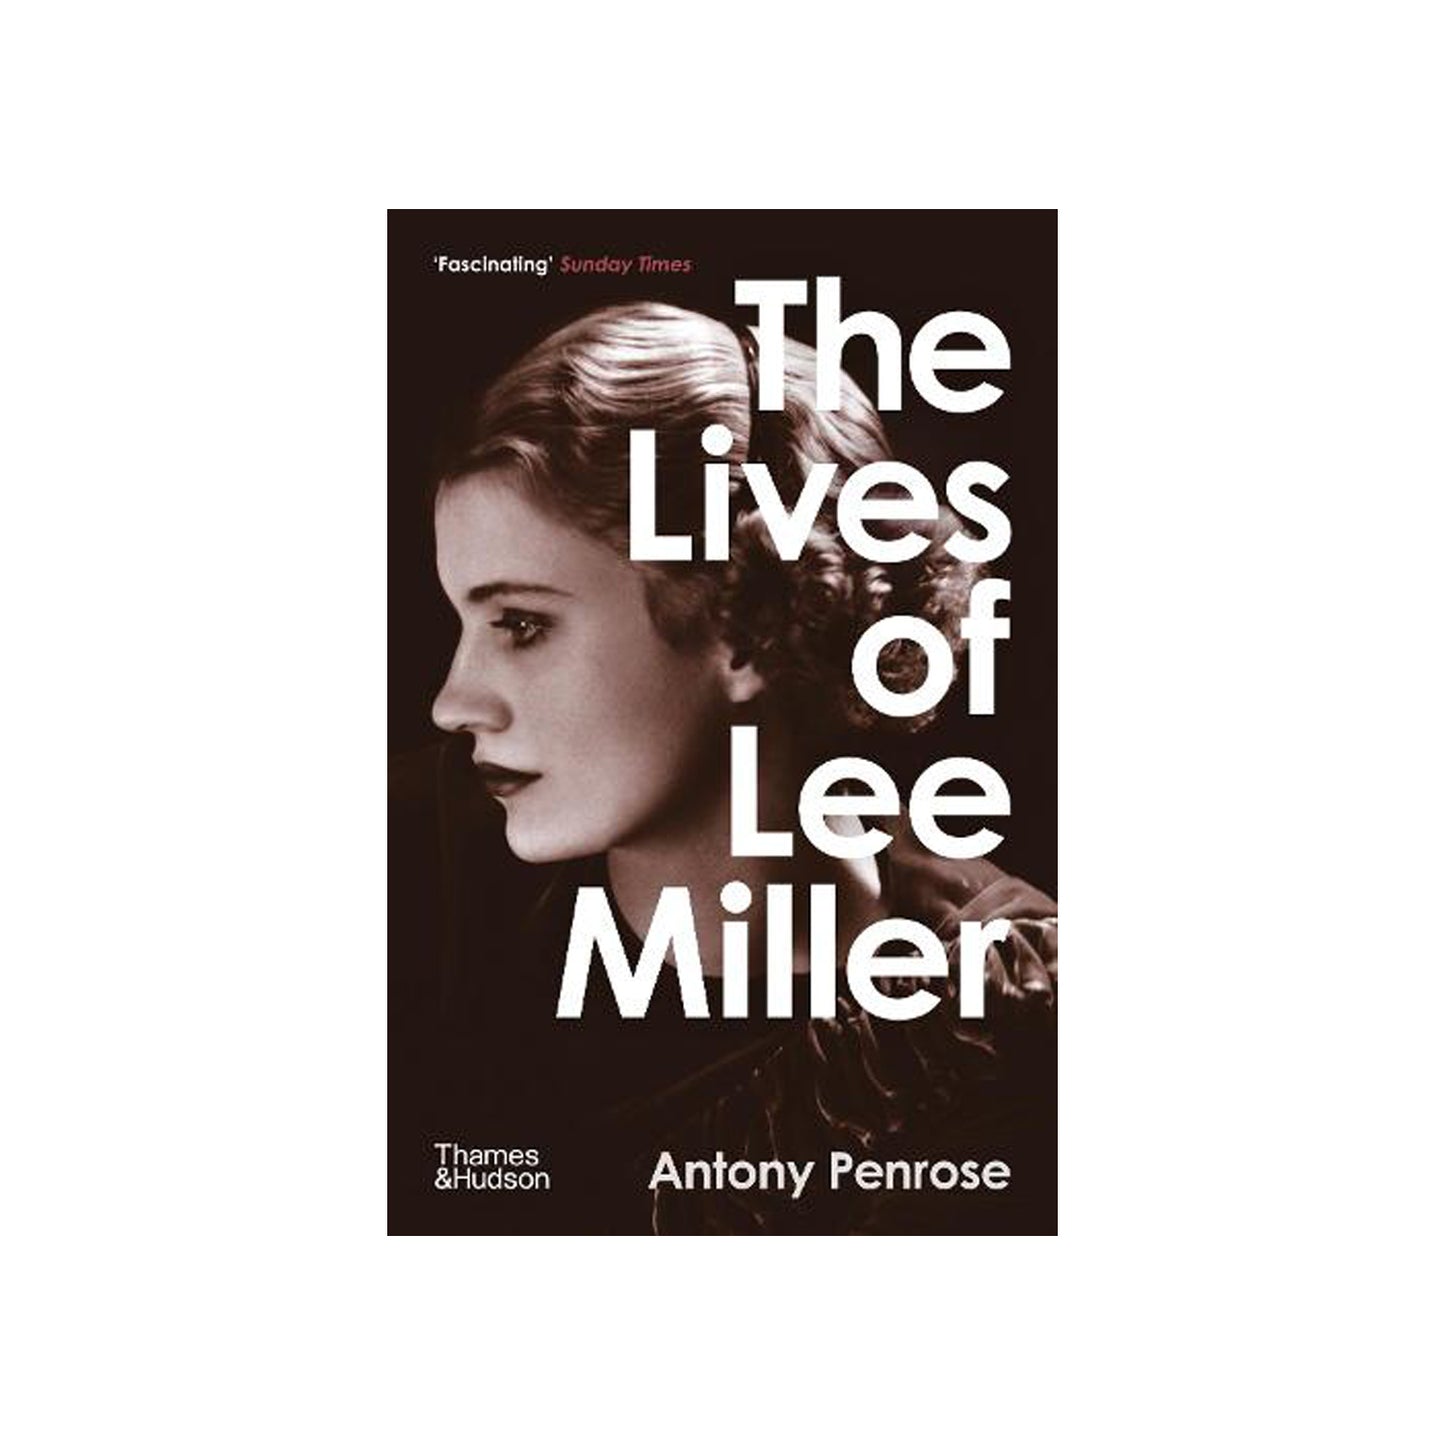 The Lives of Lee Miller by Anthony Penrose